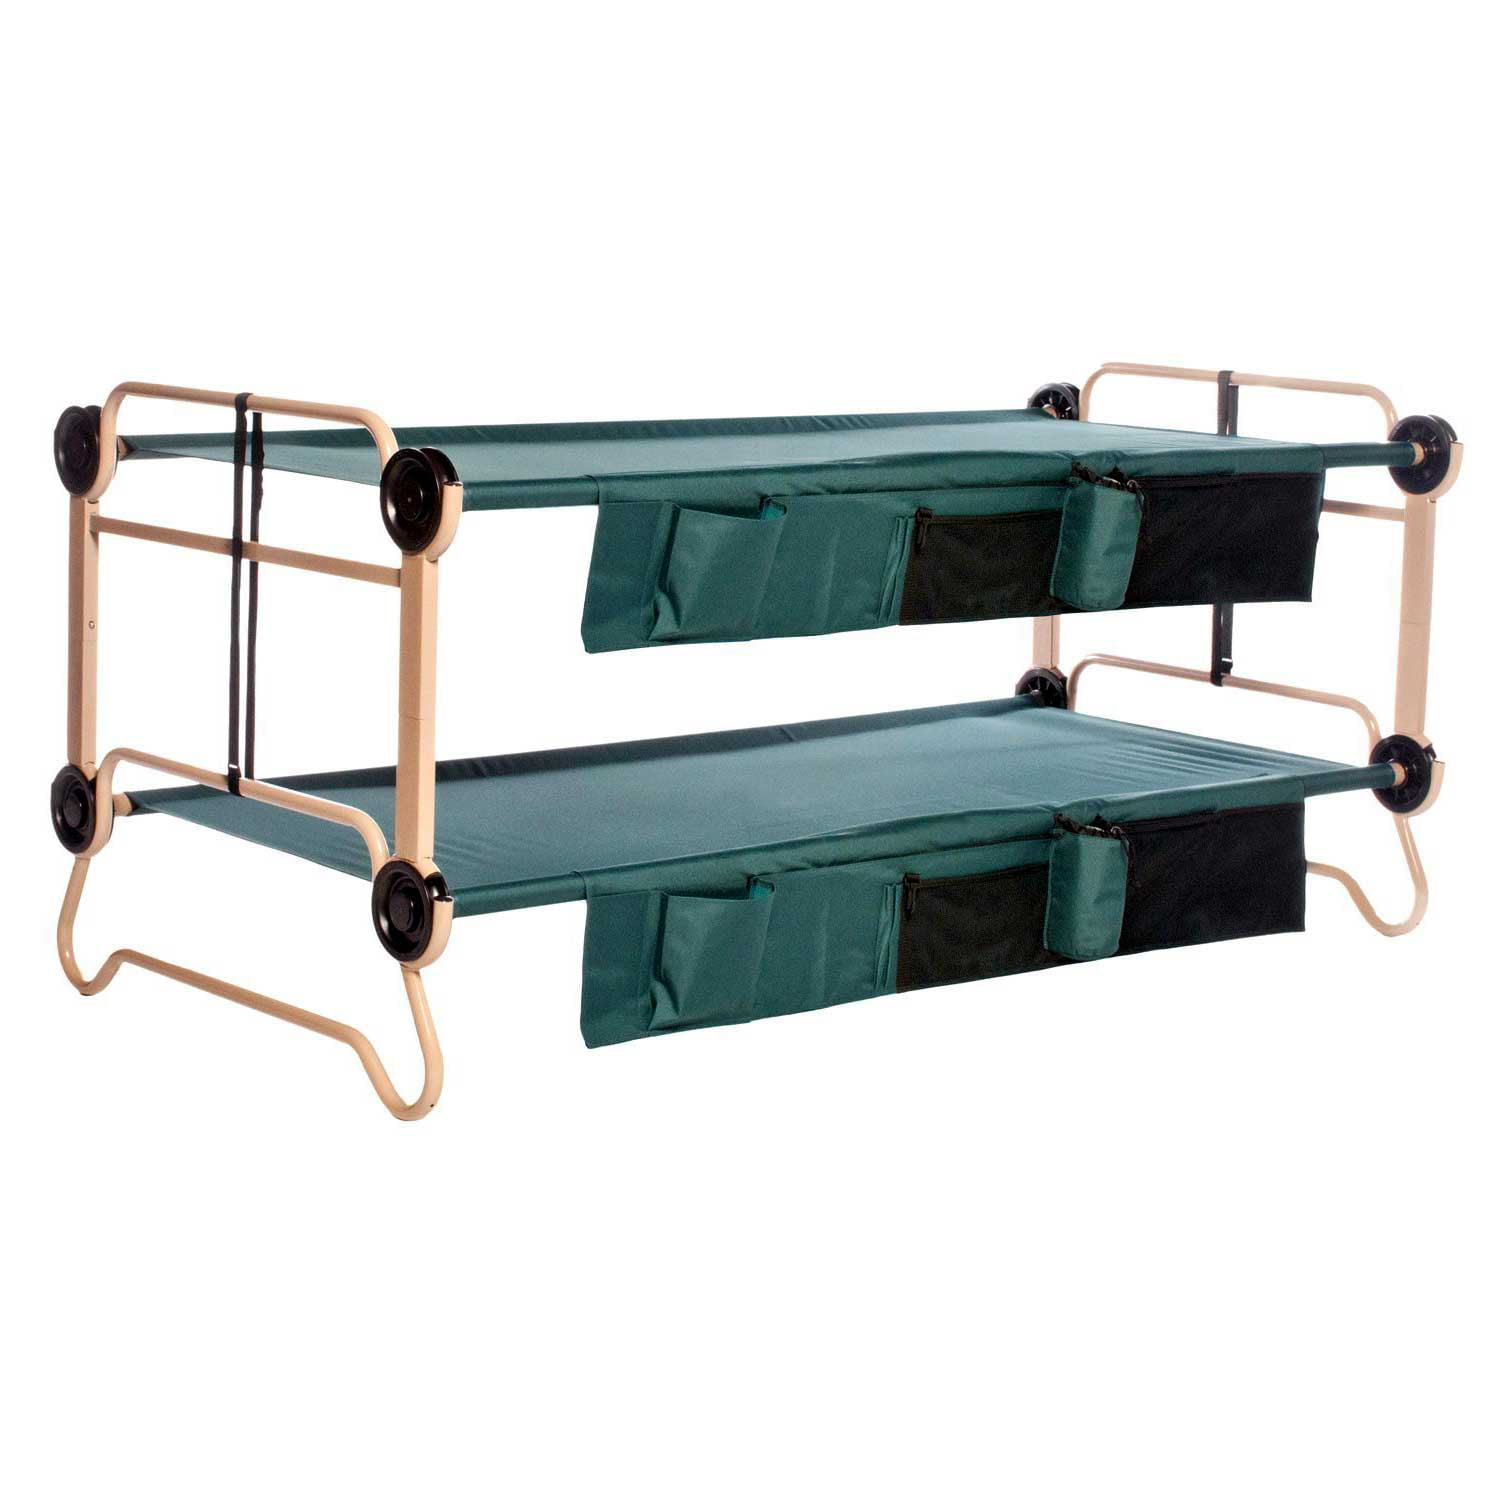 Disc O Bed X Large Cam Bunk Benchable, Bunk Bed Cots